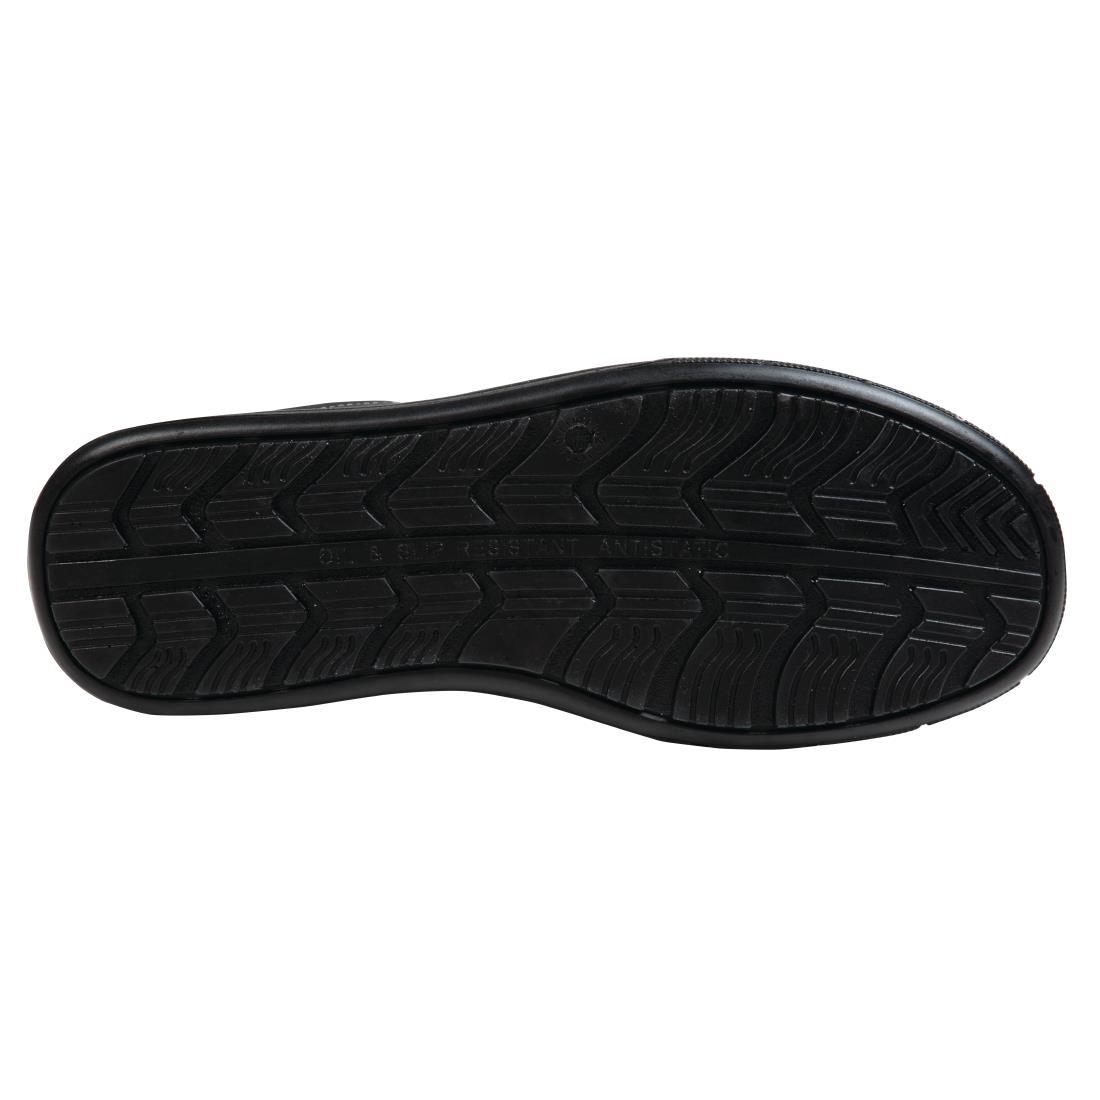 Slipbuster Safety Trainers Black 43 - BB420-43  - 2